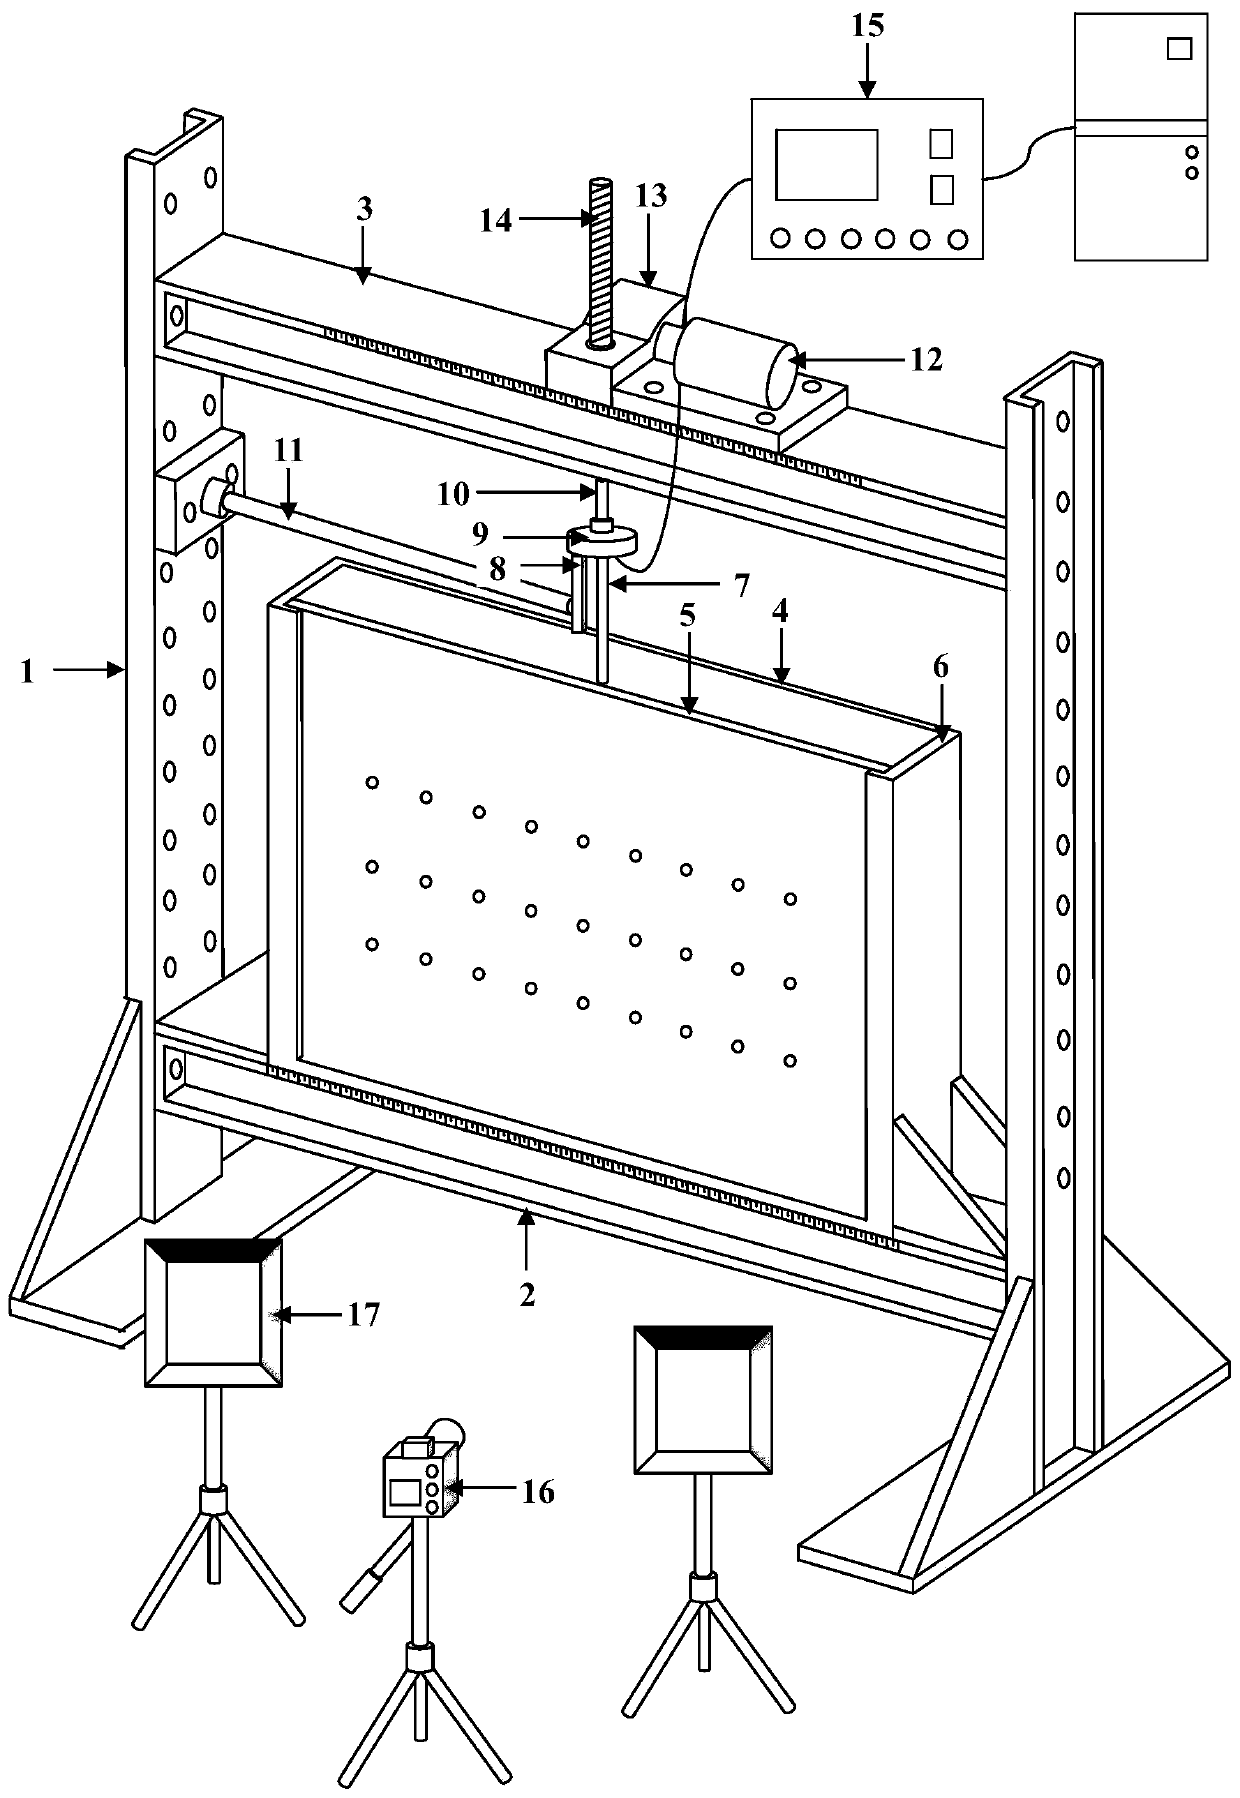 A test device and method for measuring the displacement field of soil around a loaded structure